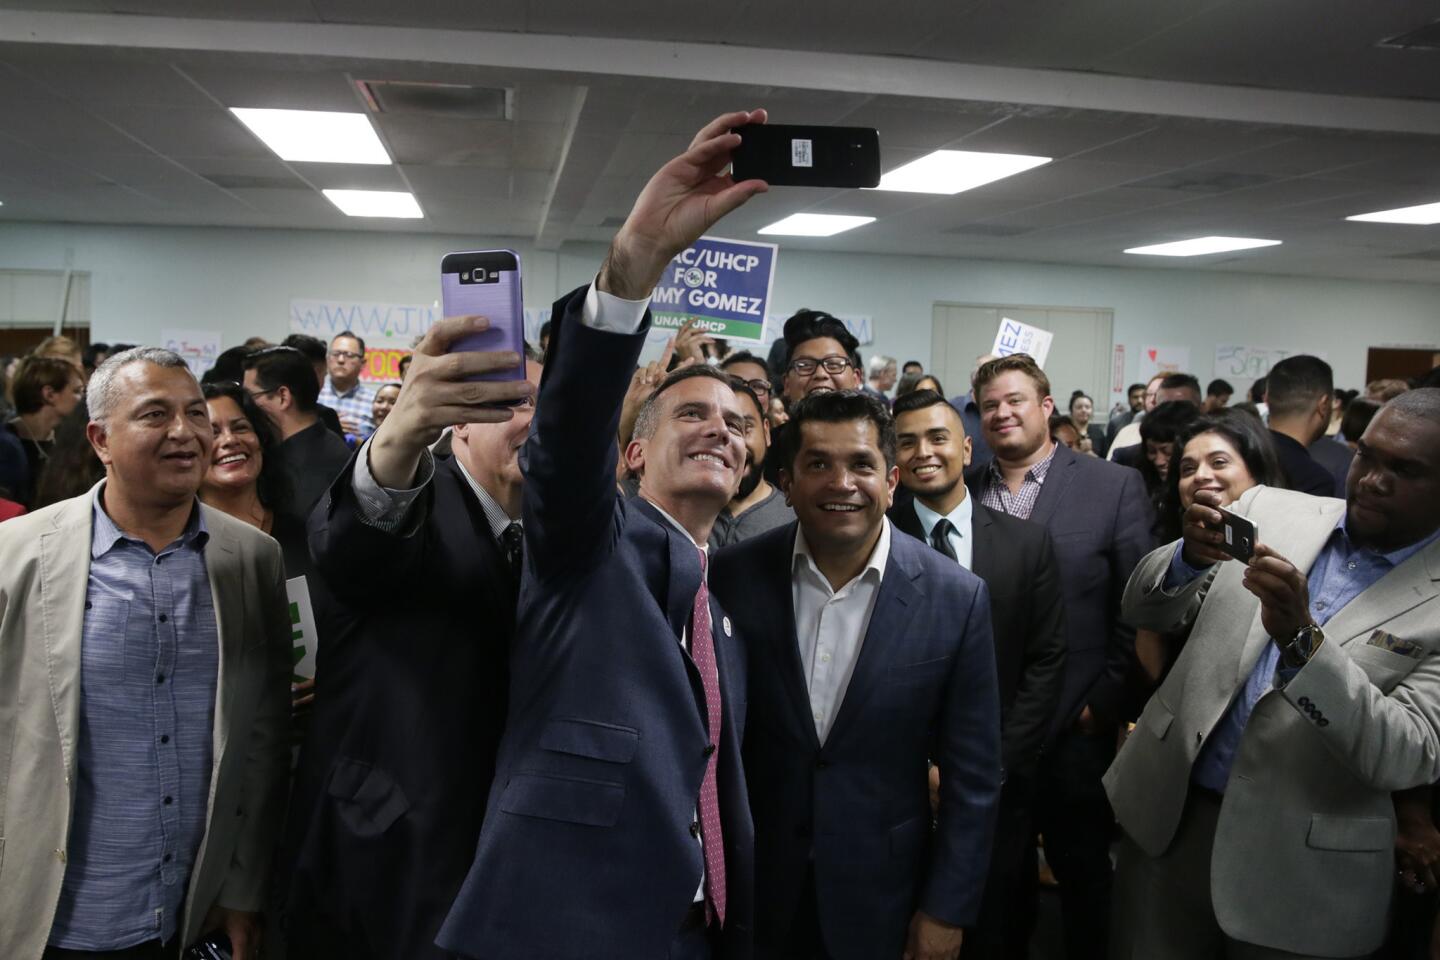 Los Angeles Mayor Eric Garcetti takes a selfie with Assemblyman Jimmy Gomez during Gomez's election night rally for the 34th Congressional District.